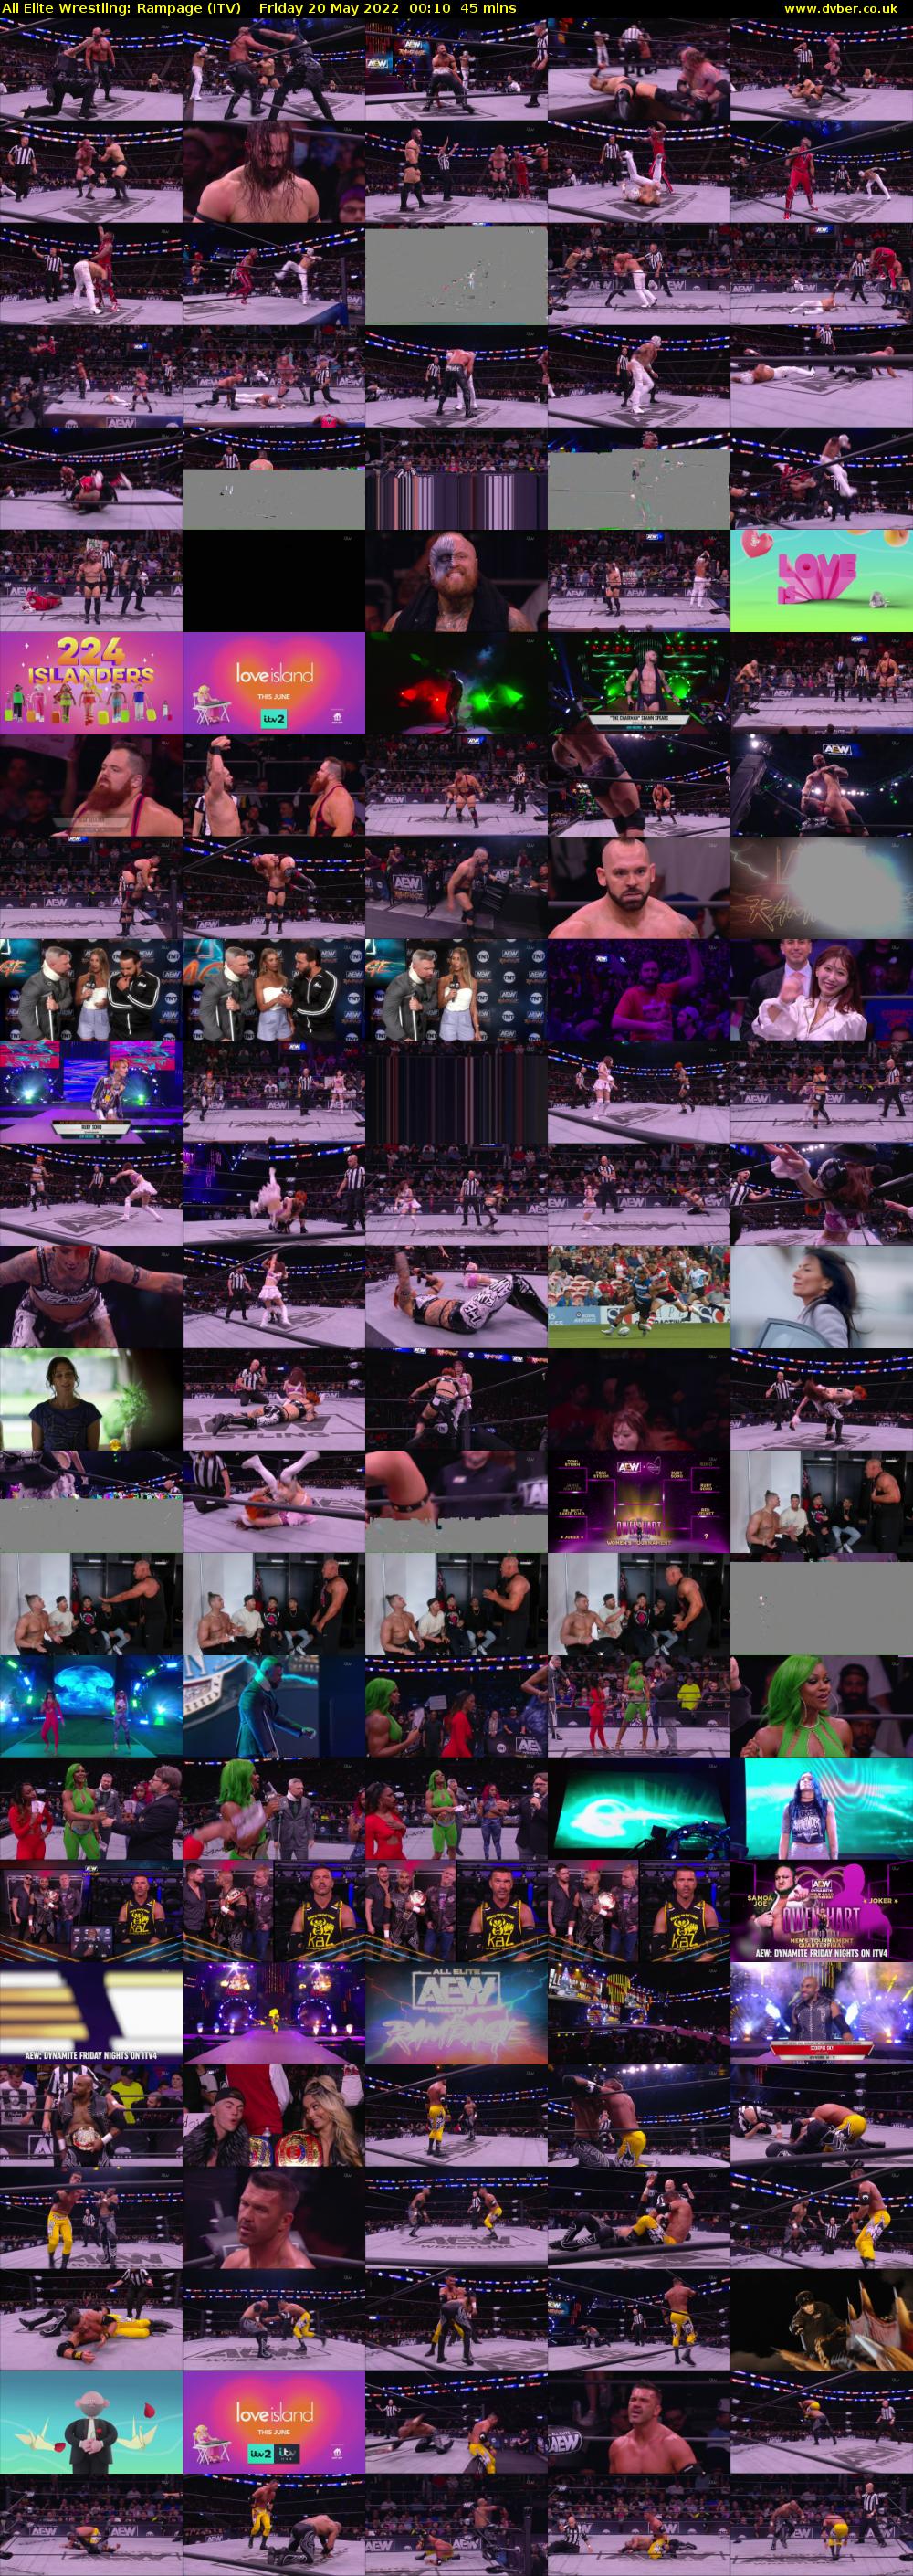 All Elite Wrestling: Rampage (ITV) Friday 20 May 2022 00:10 - 00:55